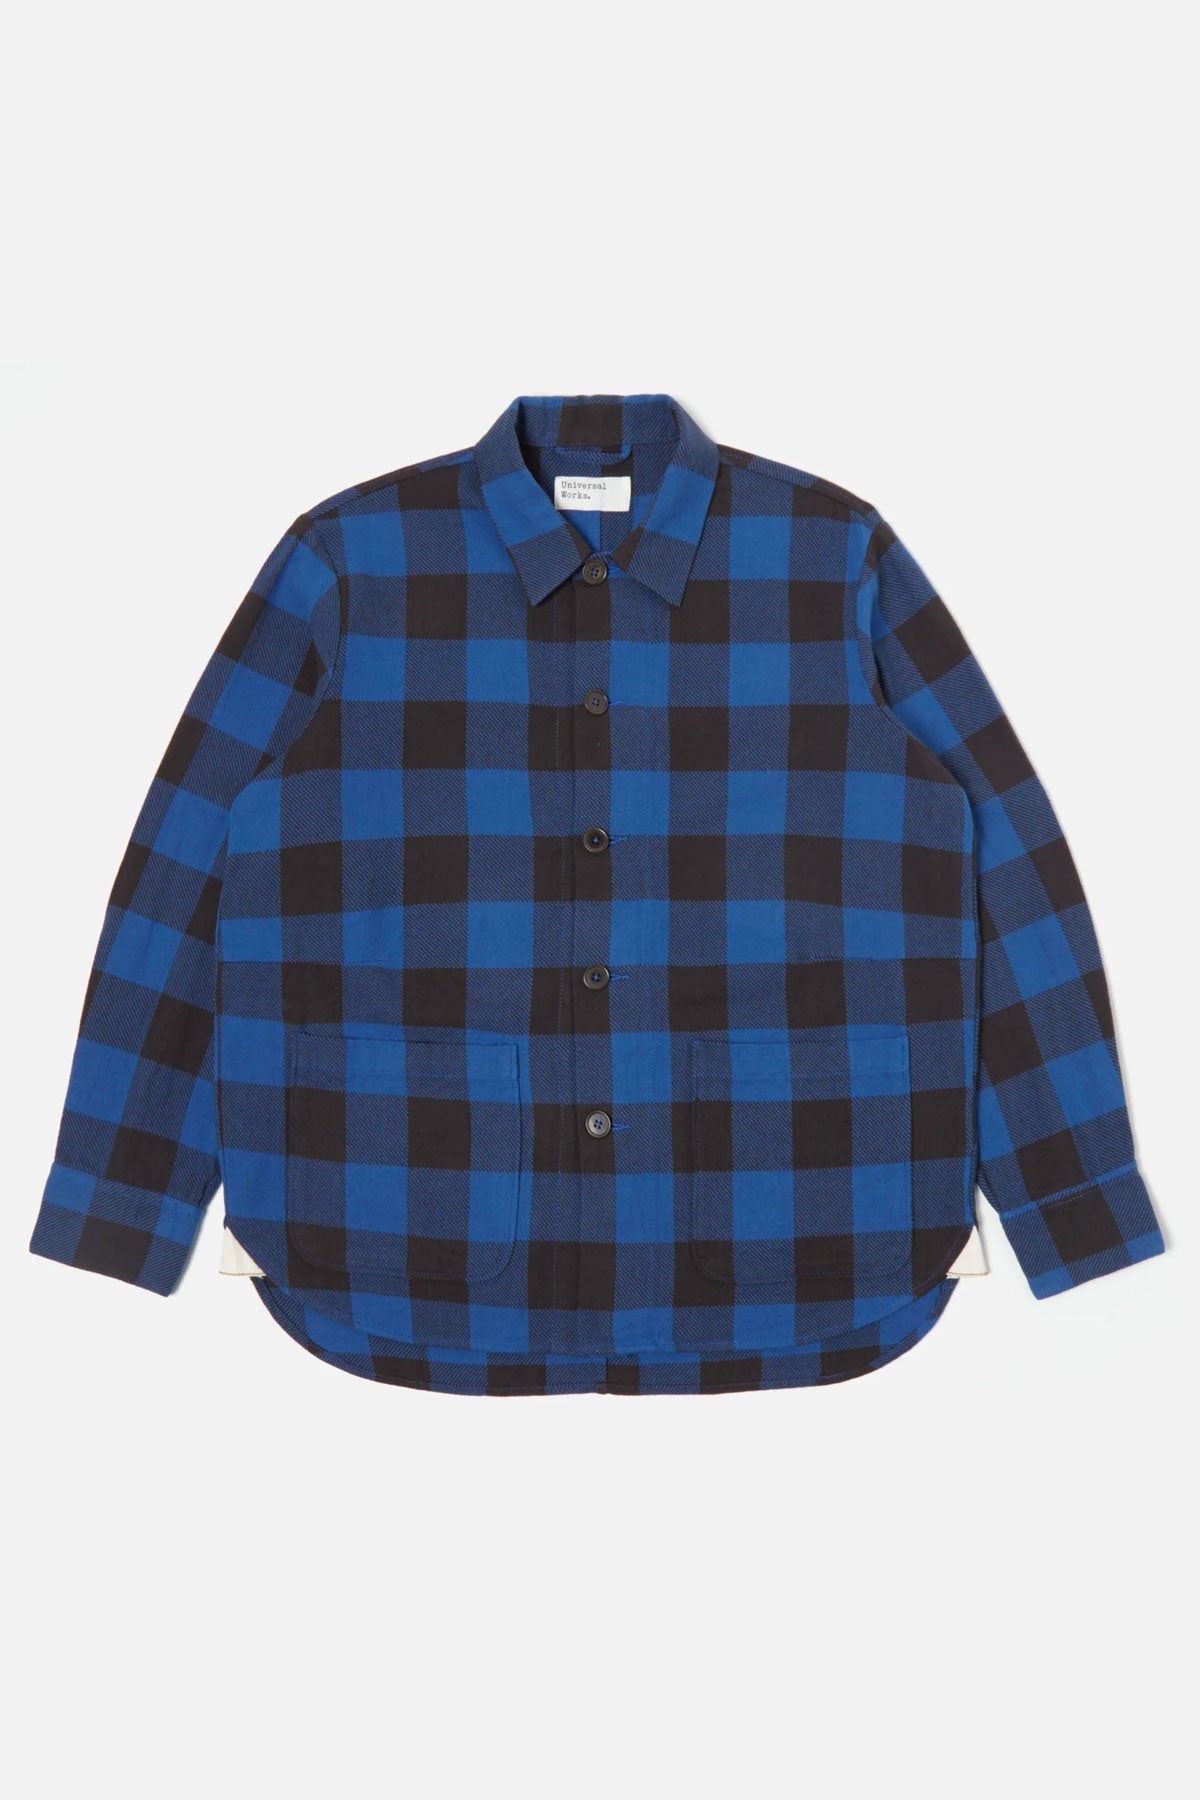 Universal Works - Travail Shirt In Navy Winter Gingham